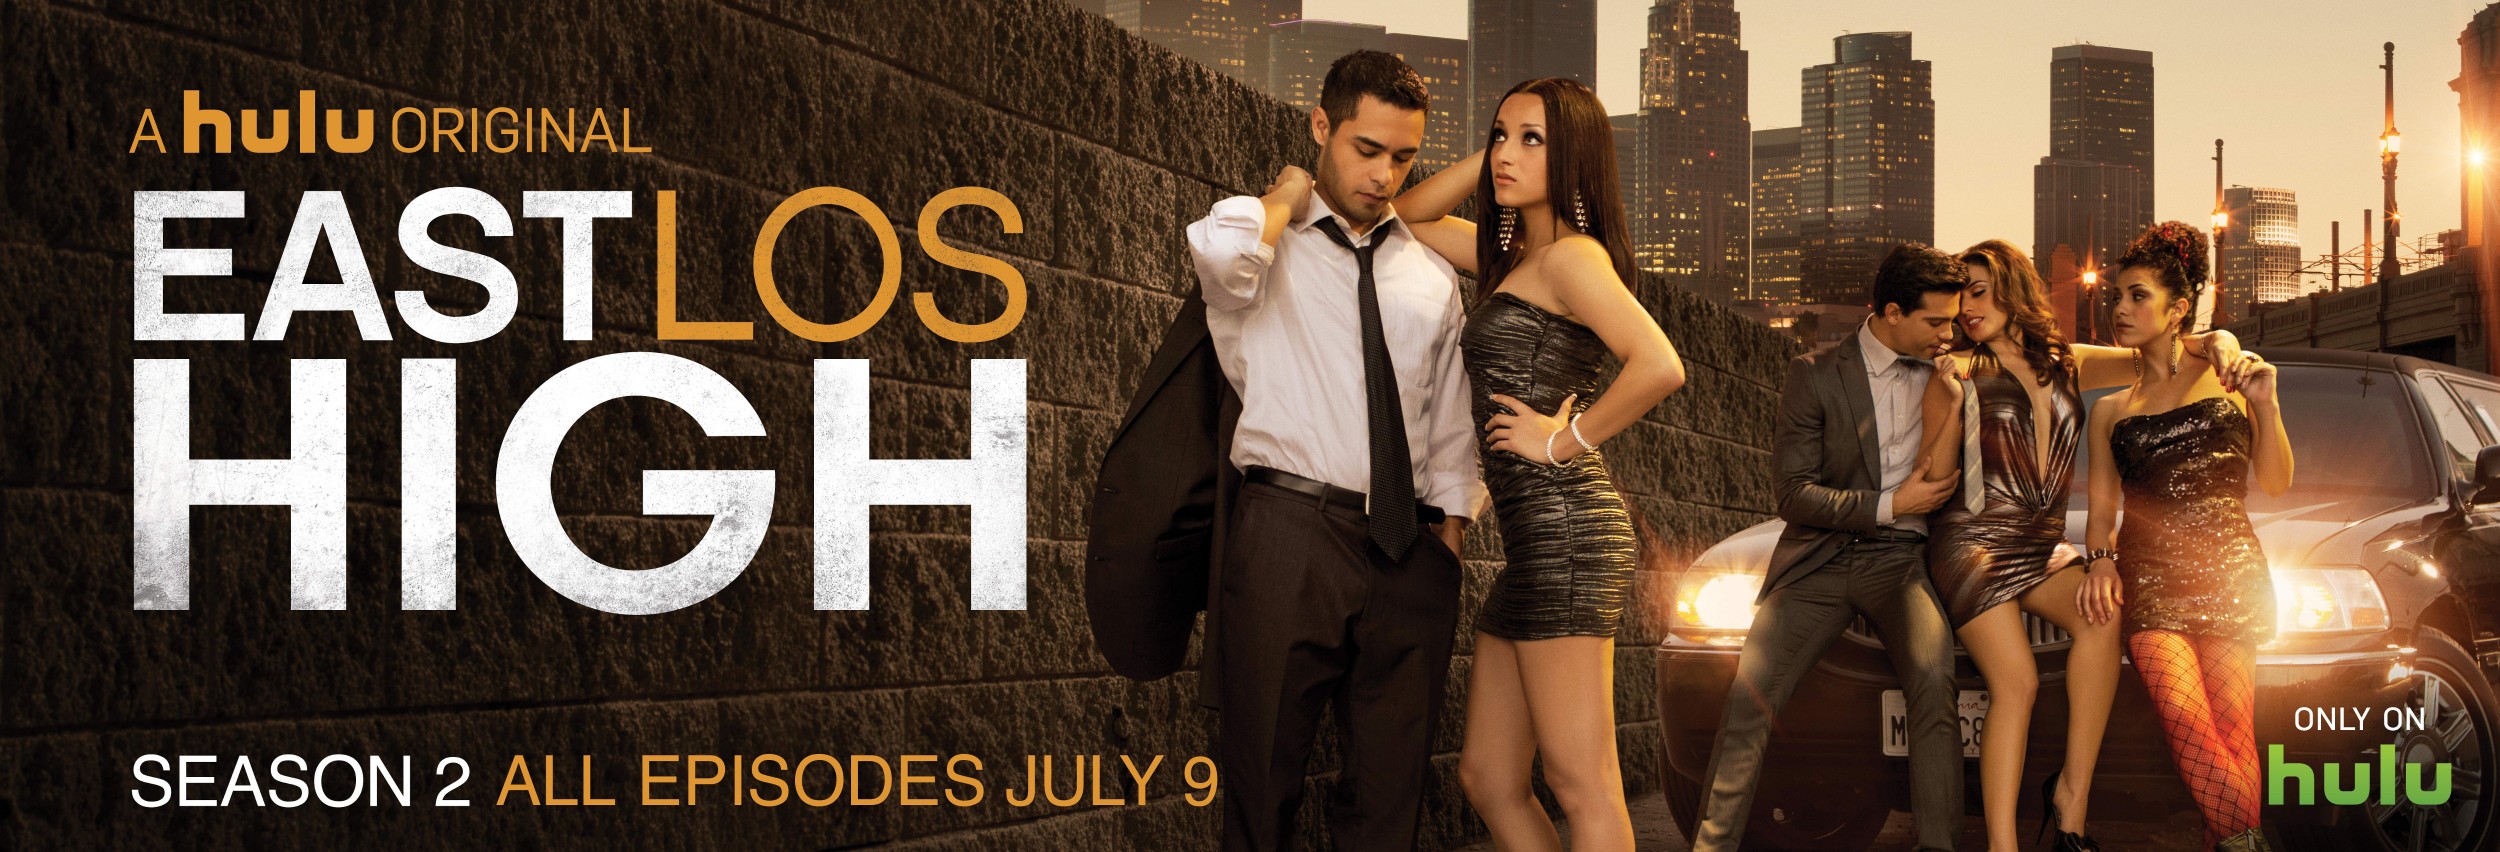 Mega Sized TV Poster Image for East Los High (#2 of 5)